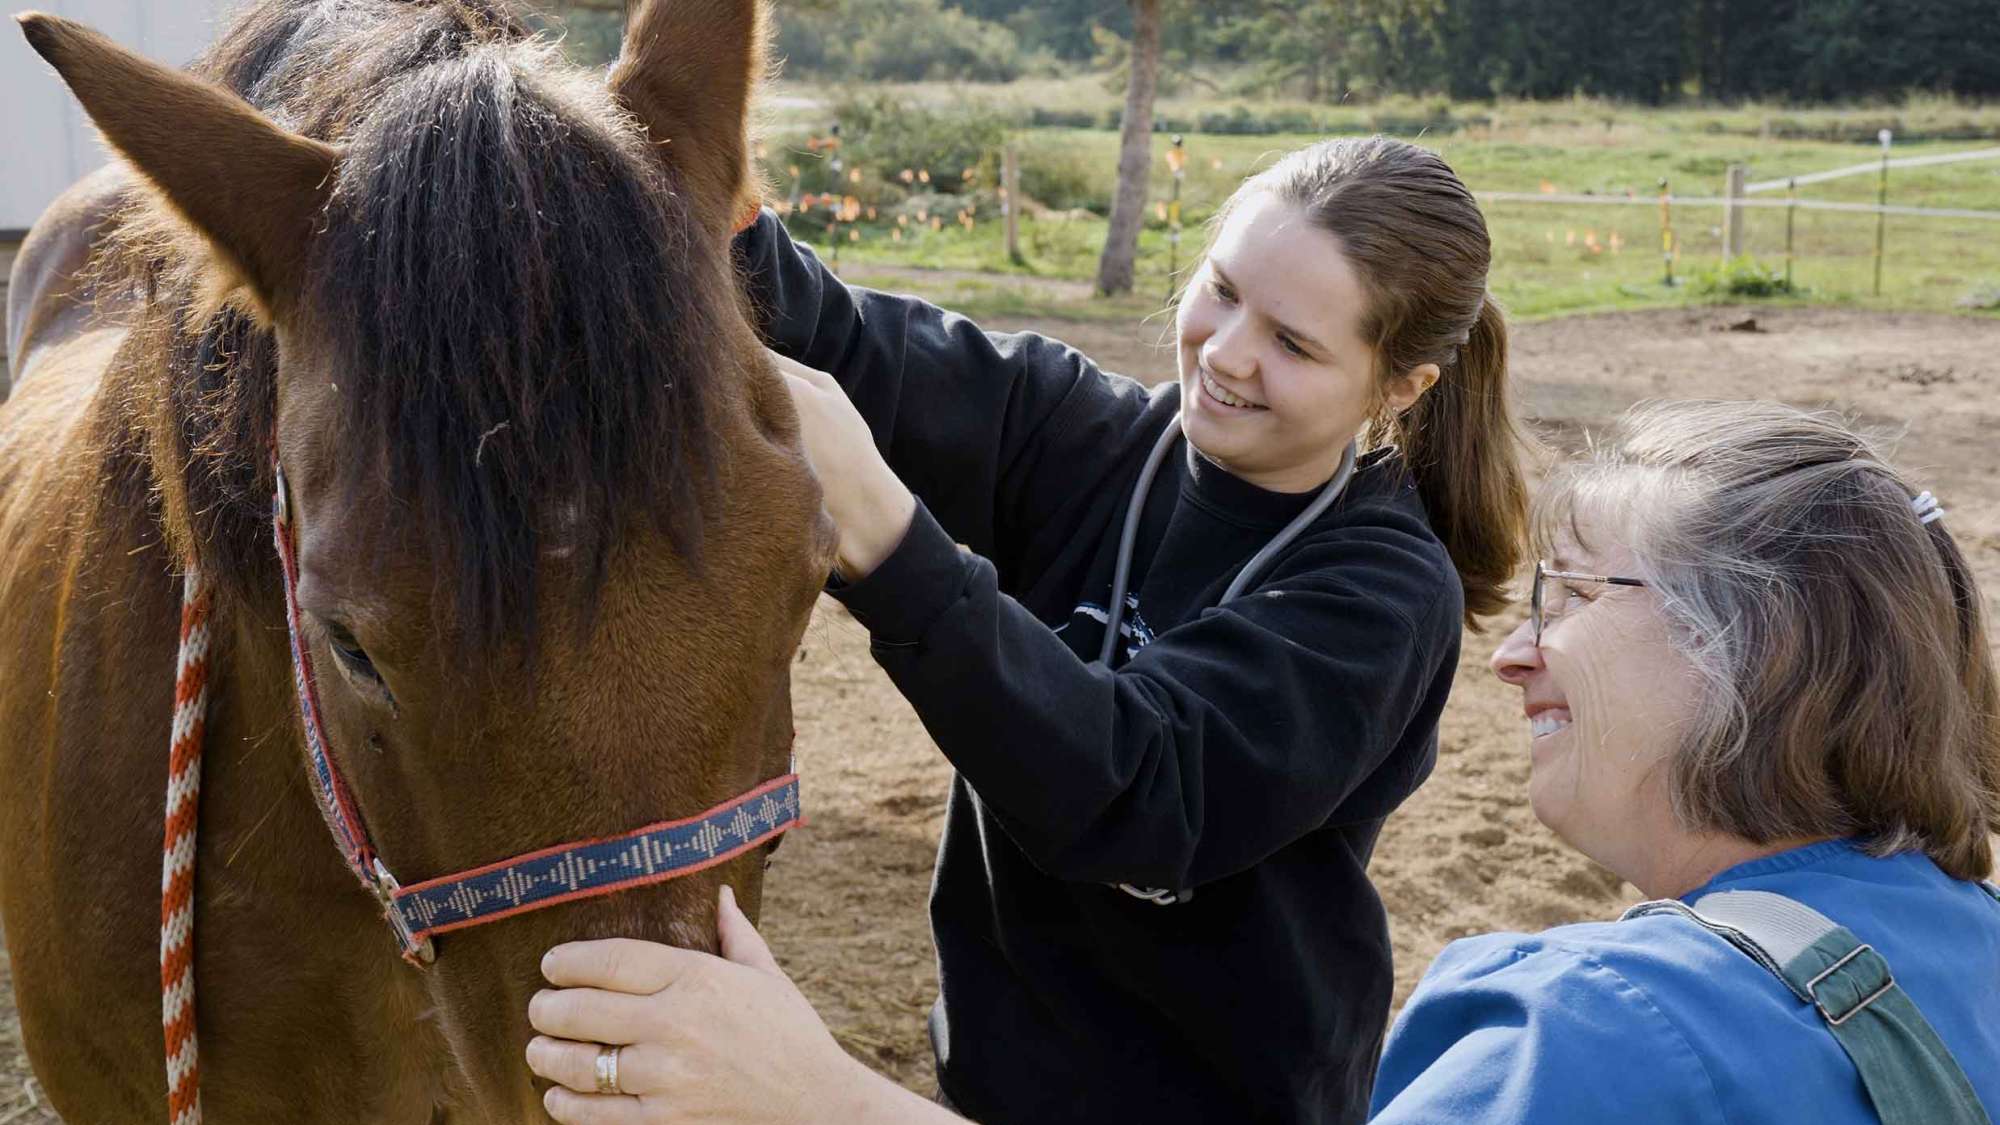 A Veterinary Technician student examines a horse, while an instructor looks on, with one hand placed on the horses face.